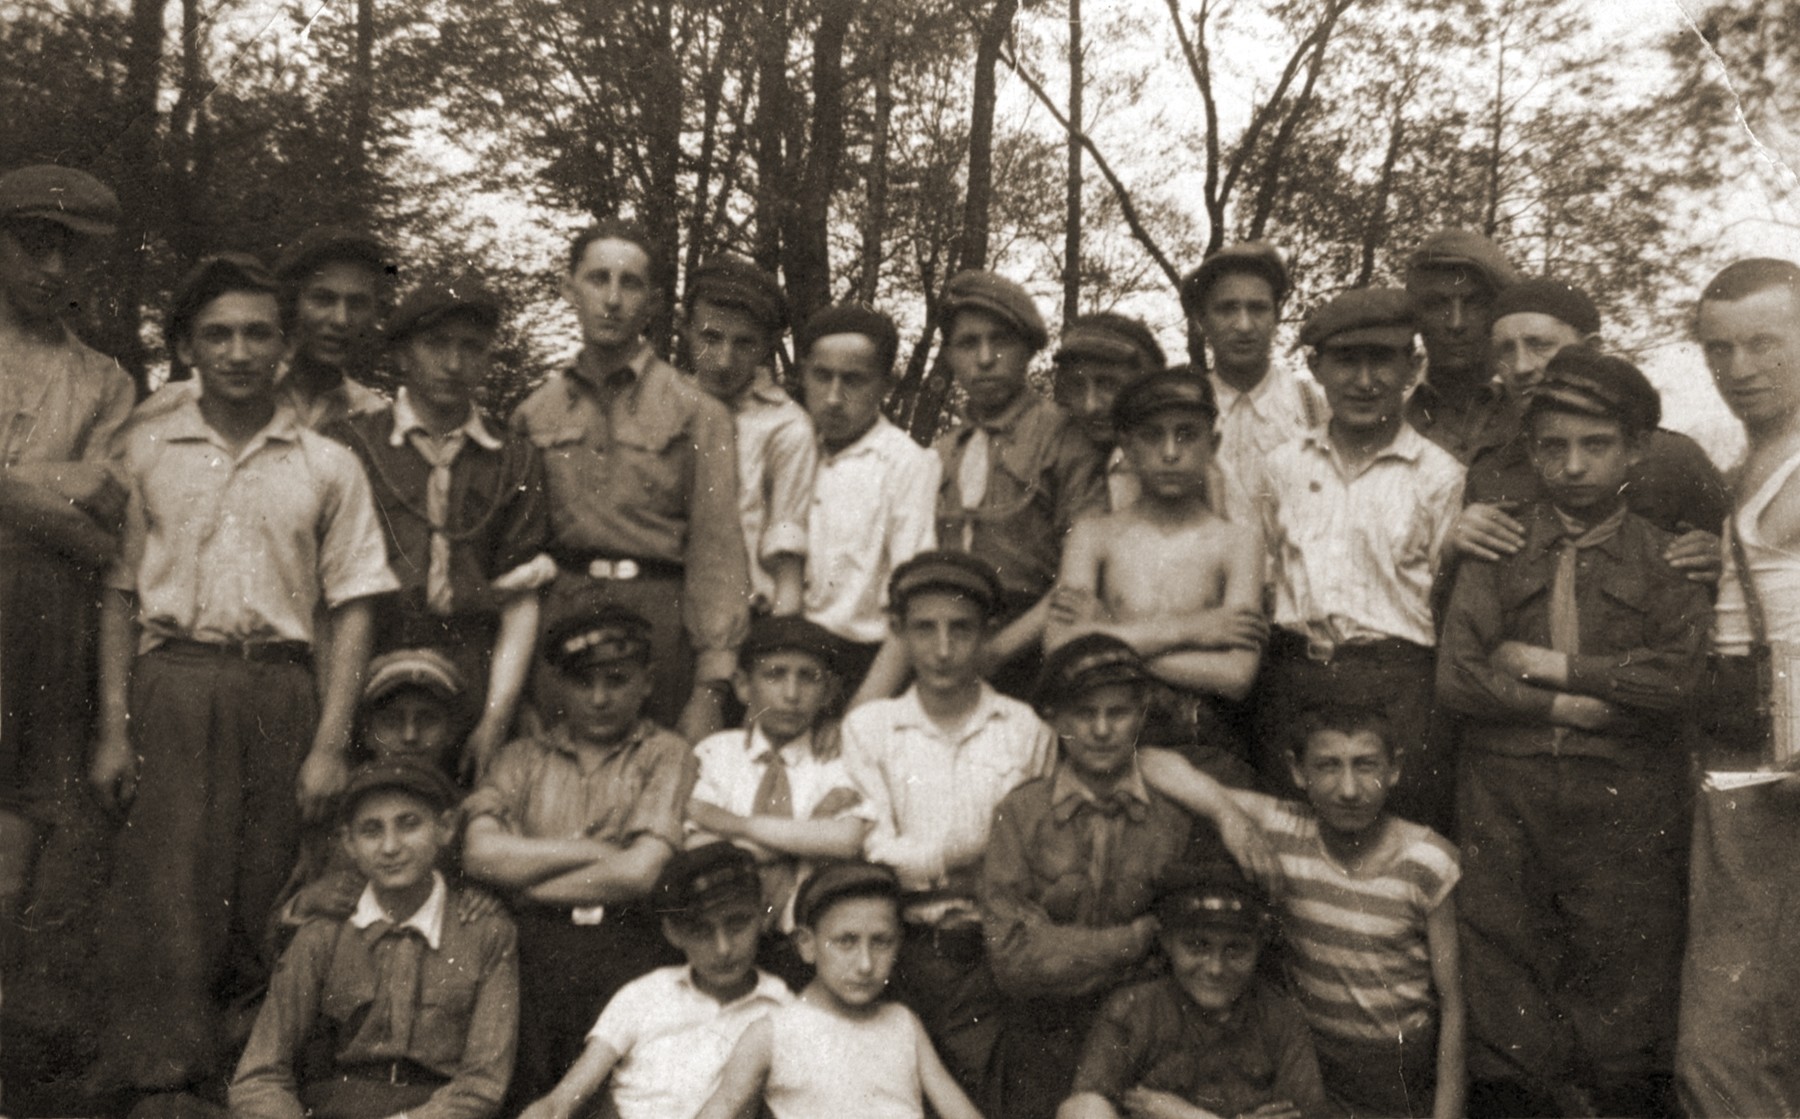 Group portrait of members of the Hashomer Hadati Zionist youth organization on an outing in the woods.

Pictured (top row, from left to right): unknown; Blumenfeld; unknown; Szmuel (Samuel) Gottlieb; Motek Rechnic; Motek Zajac; unknown; Hesiek Rechnic; Motek Ostrowiecki; Ilek Stawski;  Majer Nowomiejski; Szolem Blumenfeld; Mojszele Gruszka; Nordon, and Menachem Bukowski; (second row, left to right) are: Chune Kenner; Icek Rendel; Josek Lenczner; Rueven Lefkowicz; Motek Rendel, and Moniek Rozen (the donor, in striped shirt, aged 13 years);  (front row, from left to right) are: Hercko Lenczner; Jakub Bajtner; Moniek Szeps, and Motek Kenner.